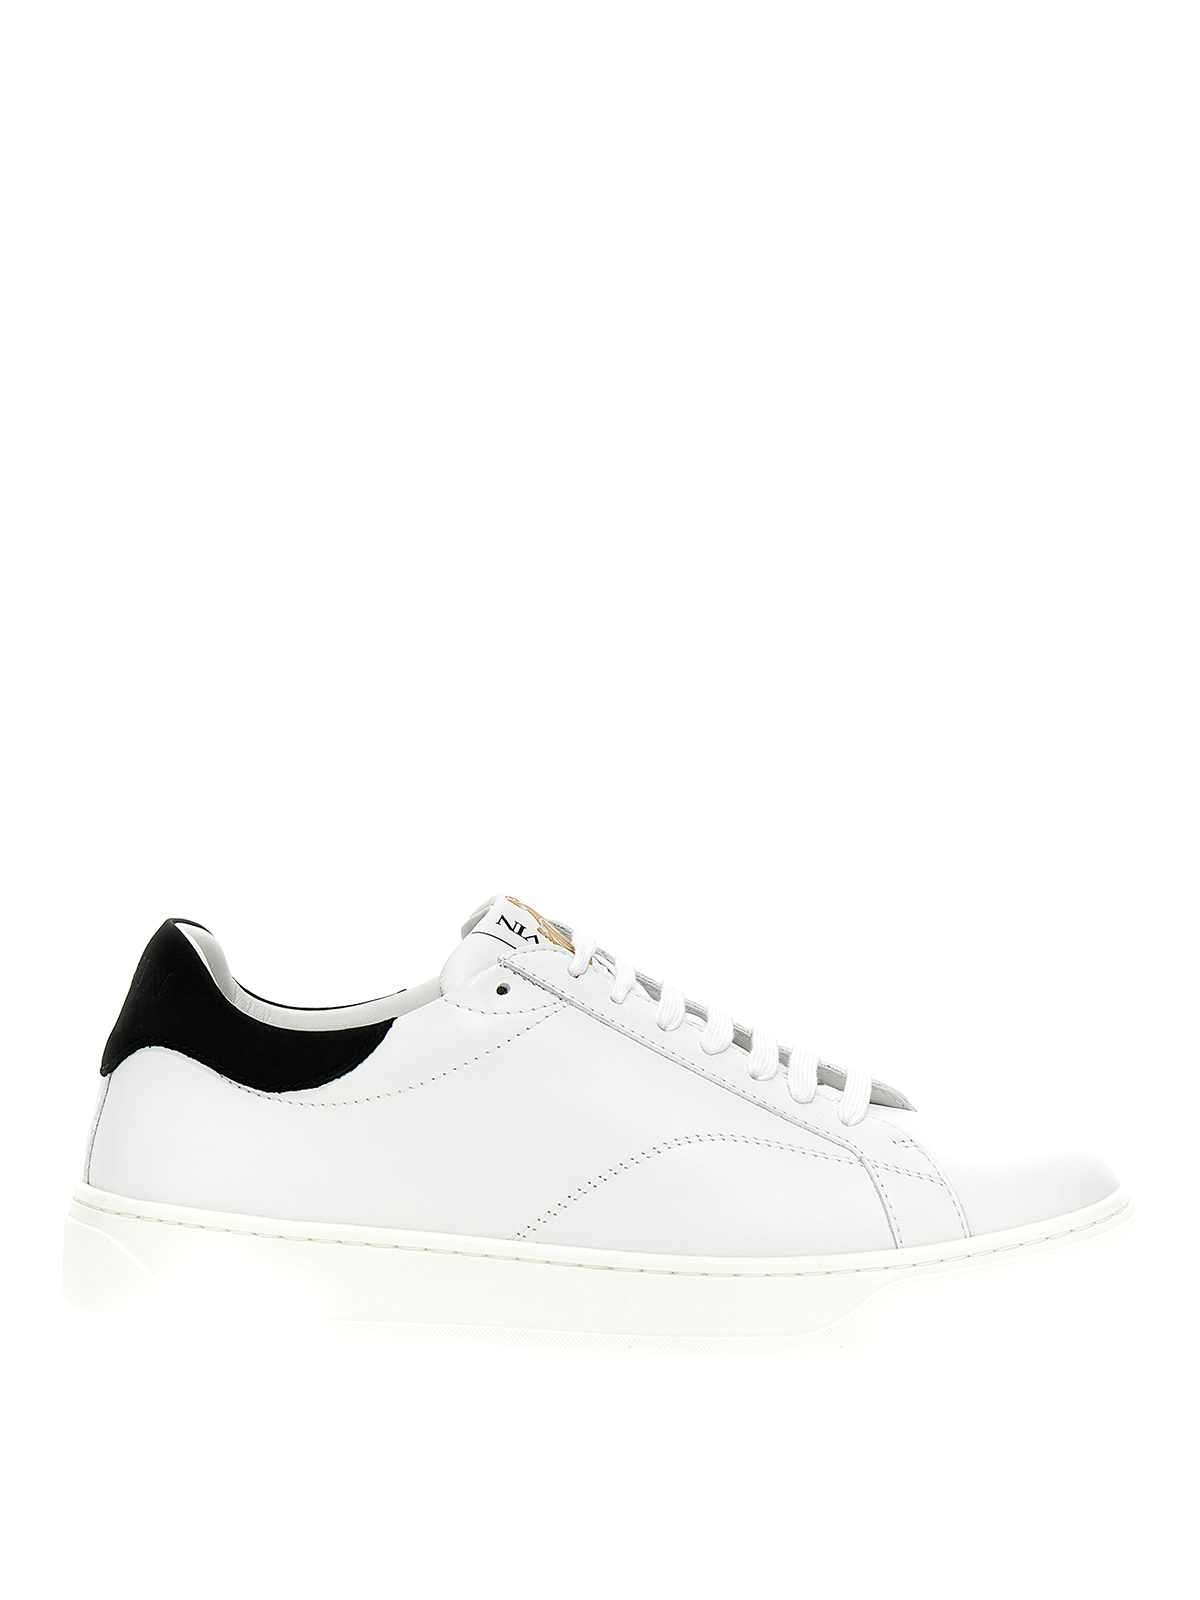 Lanvin Leather Trainers With Contrast Heel In Blanco